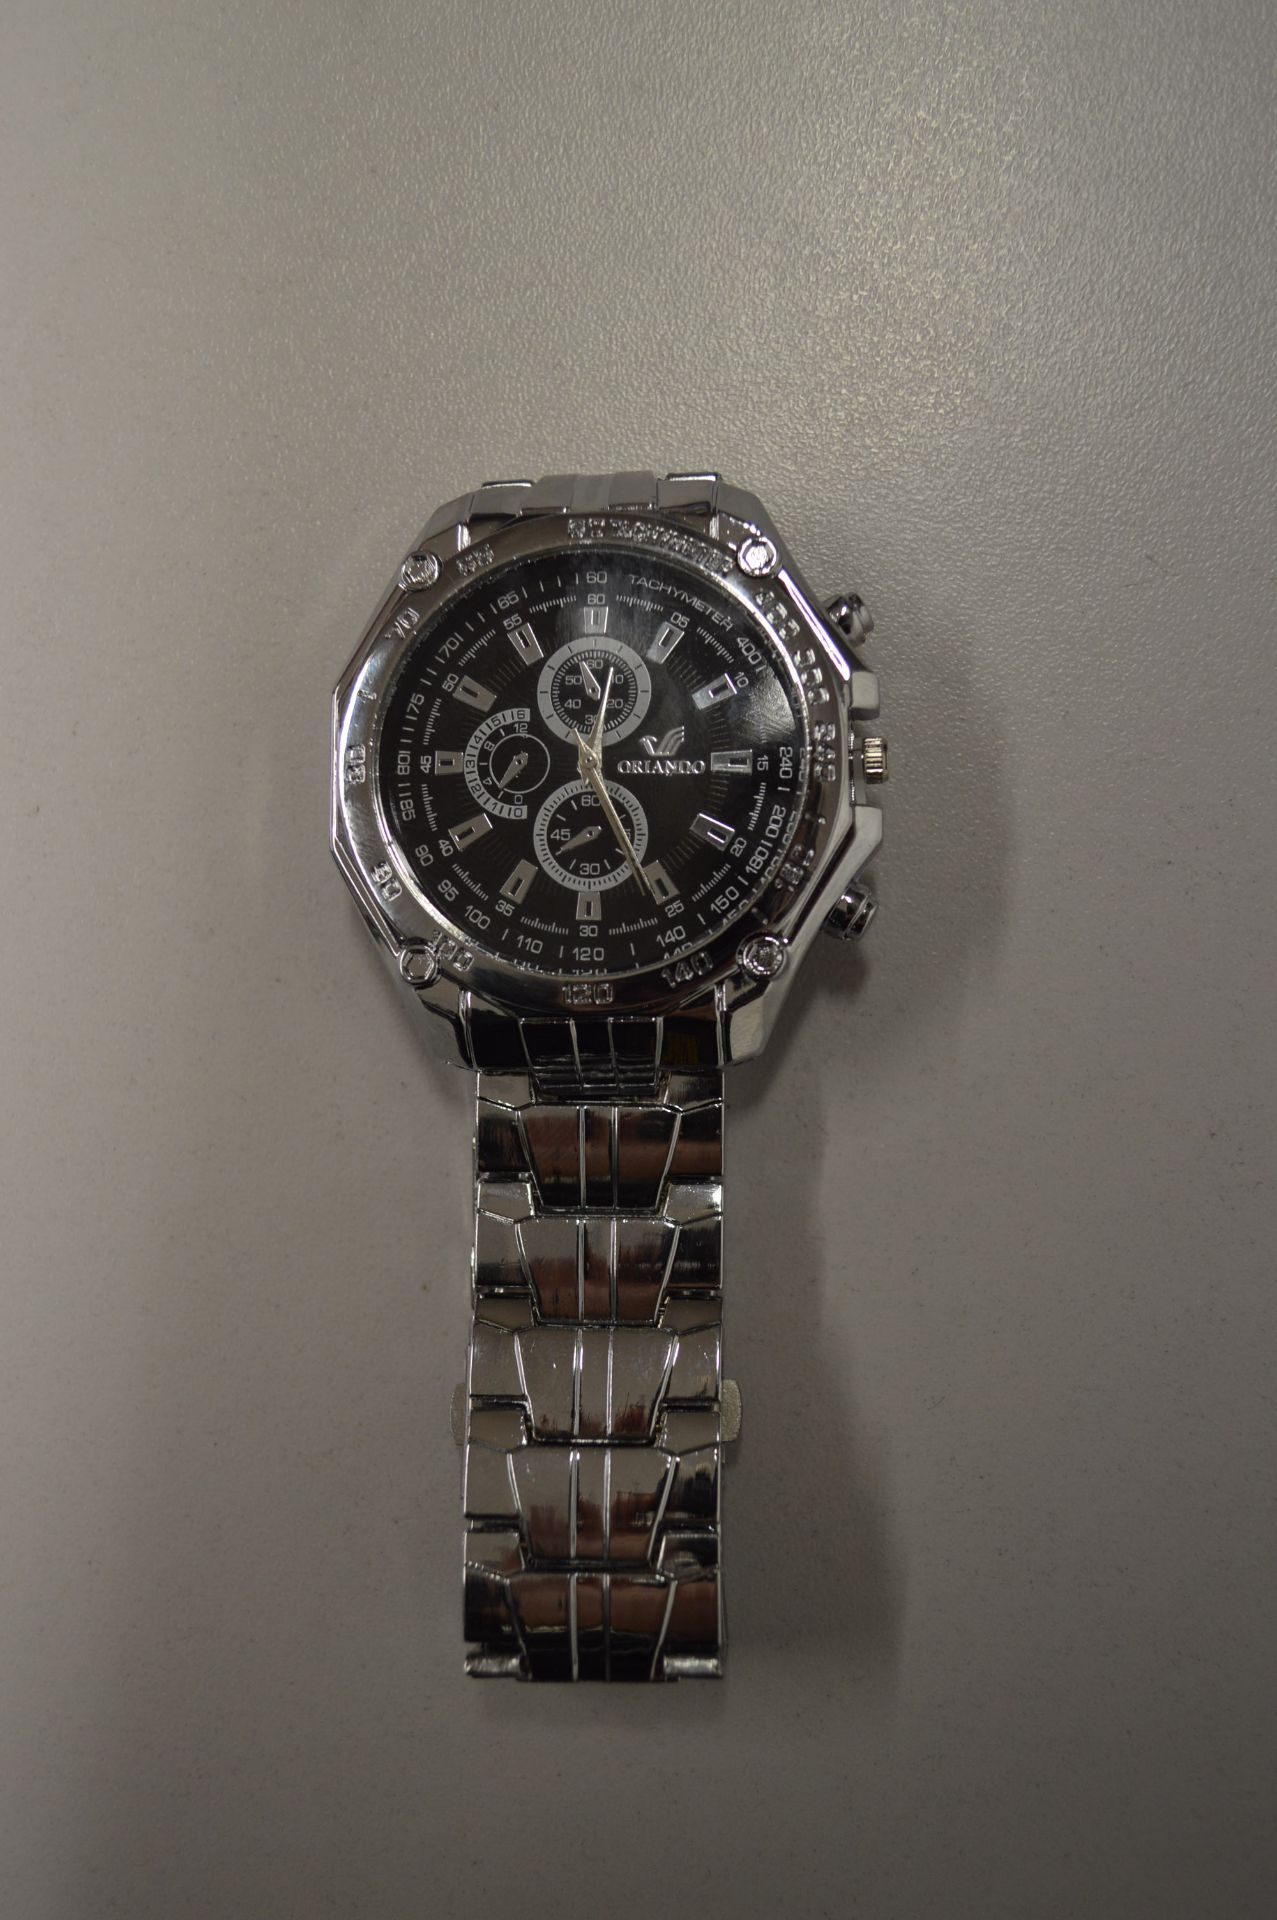 BRAND NEW ORLANDO QUARTZ WATCH WITH STAINLESS STEEL STRAP *NO VAT* - Image 4 of 4